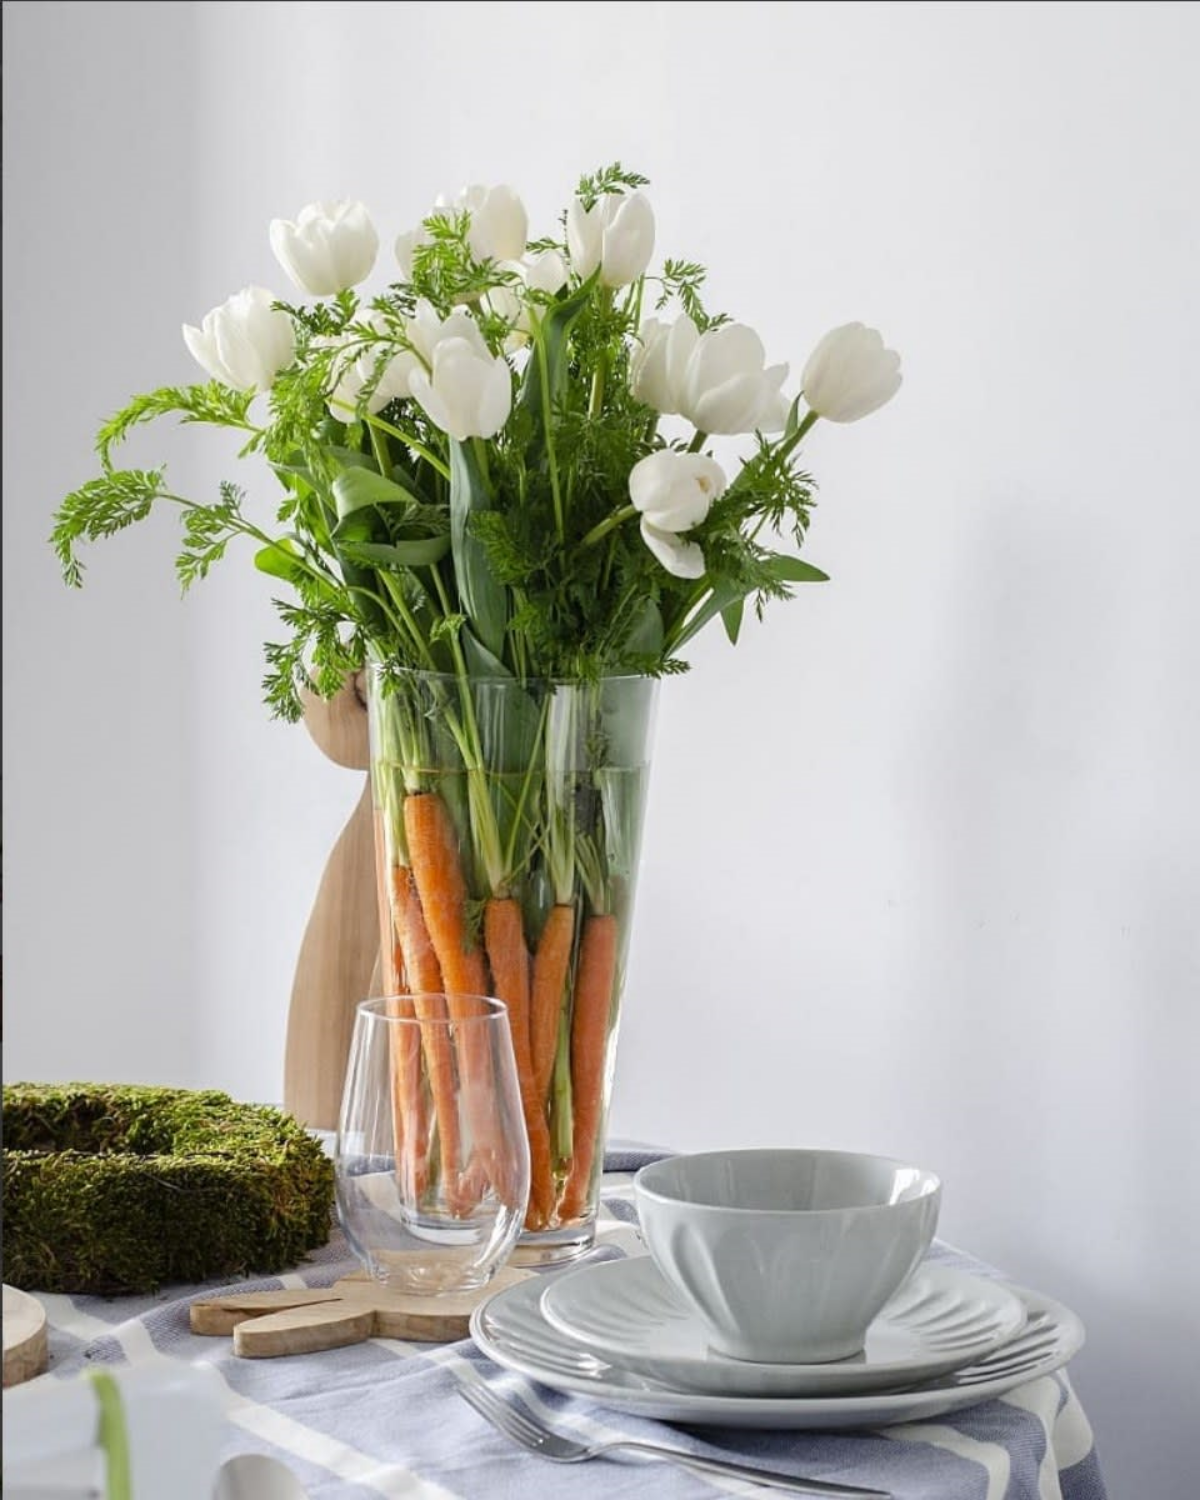 How to Decorate a Table with Tulips